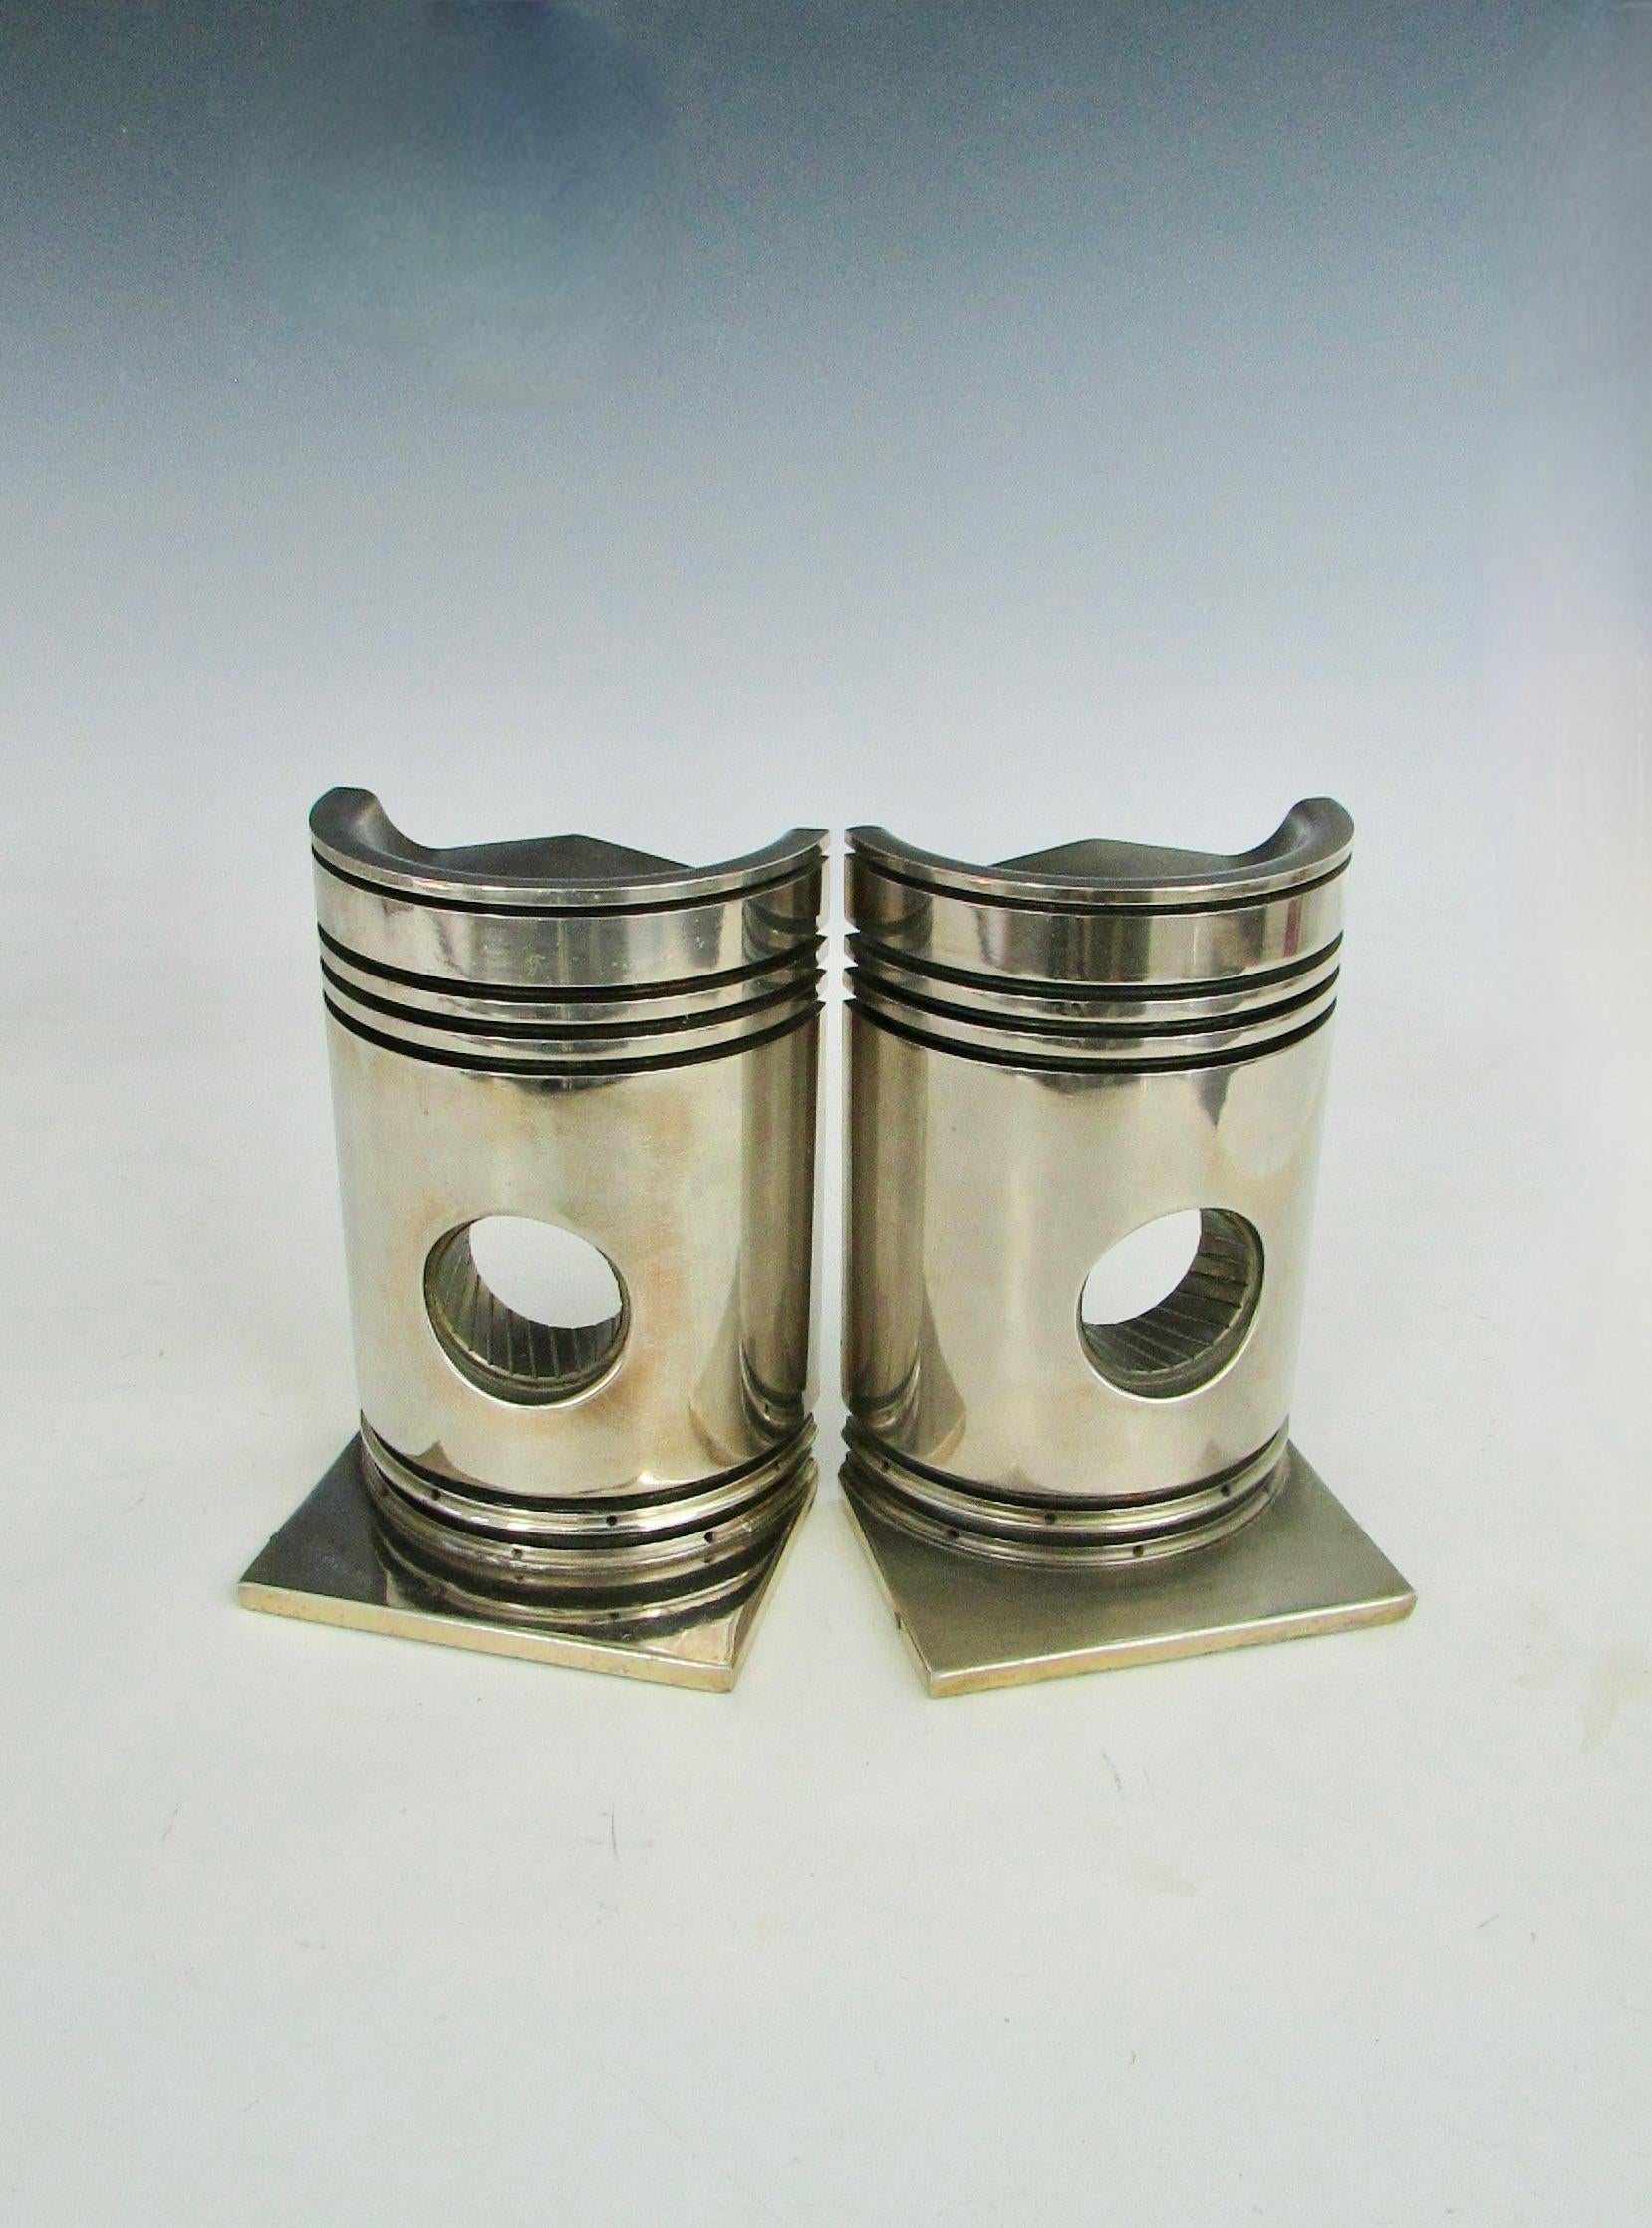 Machine Age Industrial Nickel Plated Piston Bookends 2